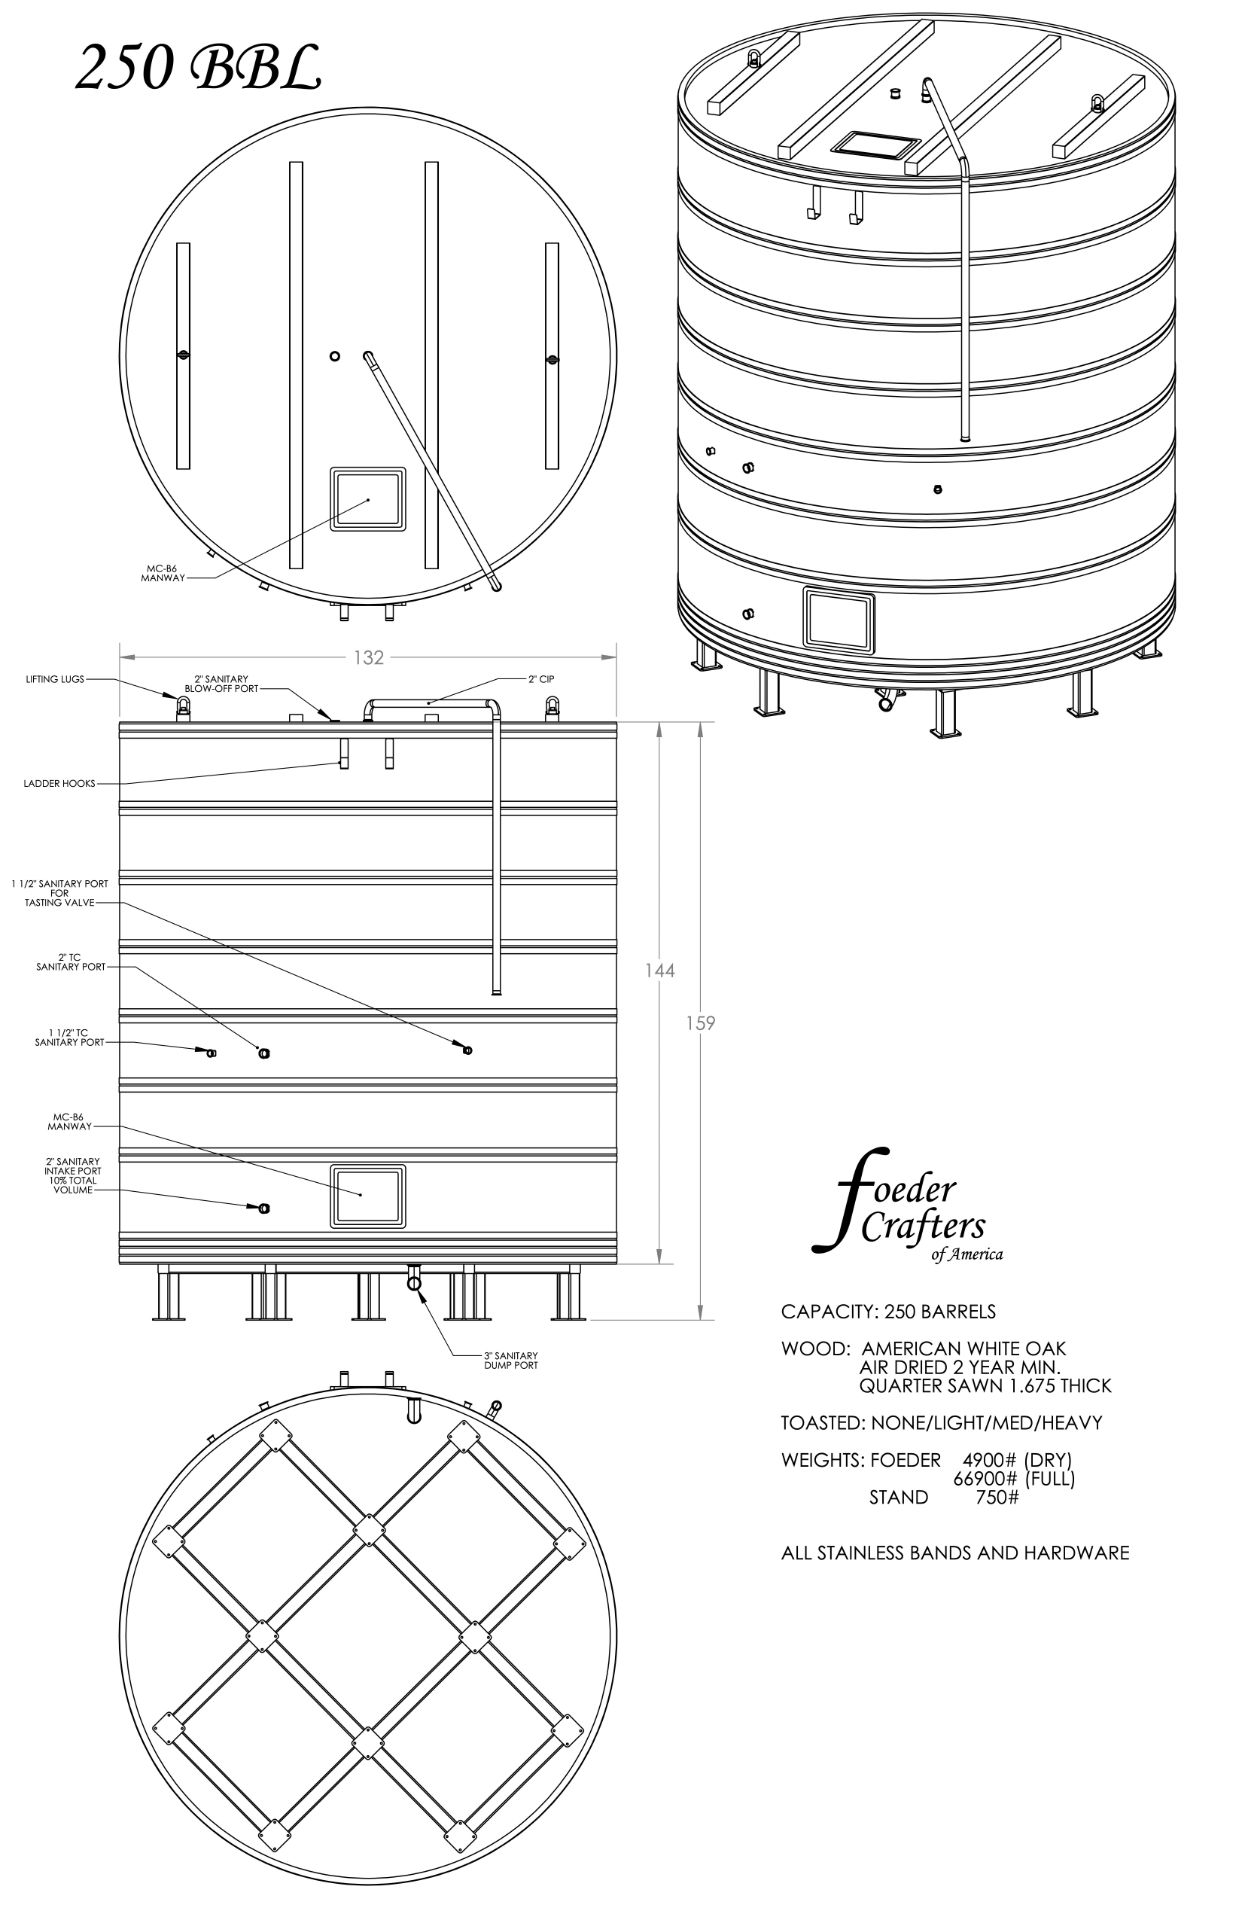 2015 Foeder Crafters of America (FCA) 250 BBL Foeder, American White Oak | Rig Fee: $5700 w/ Saddles - Image 6 of 6